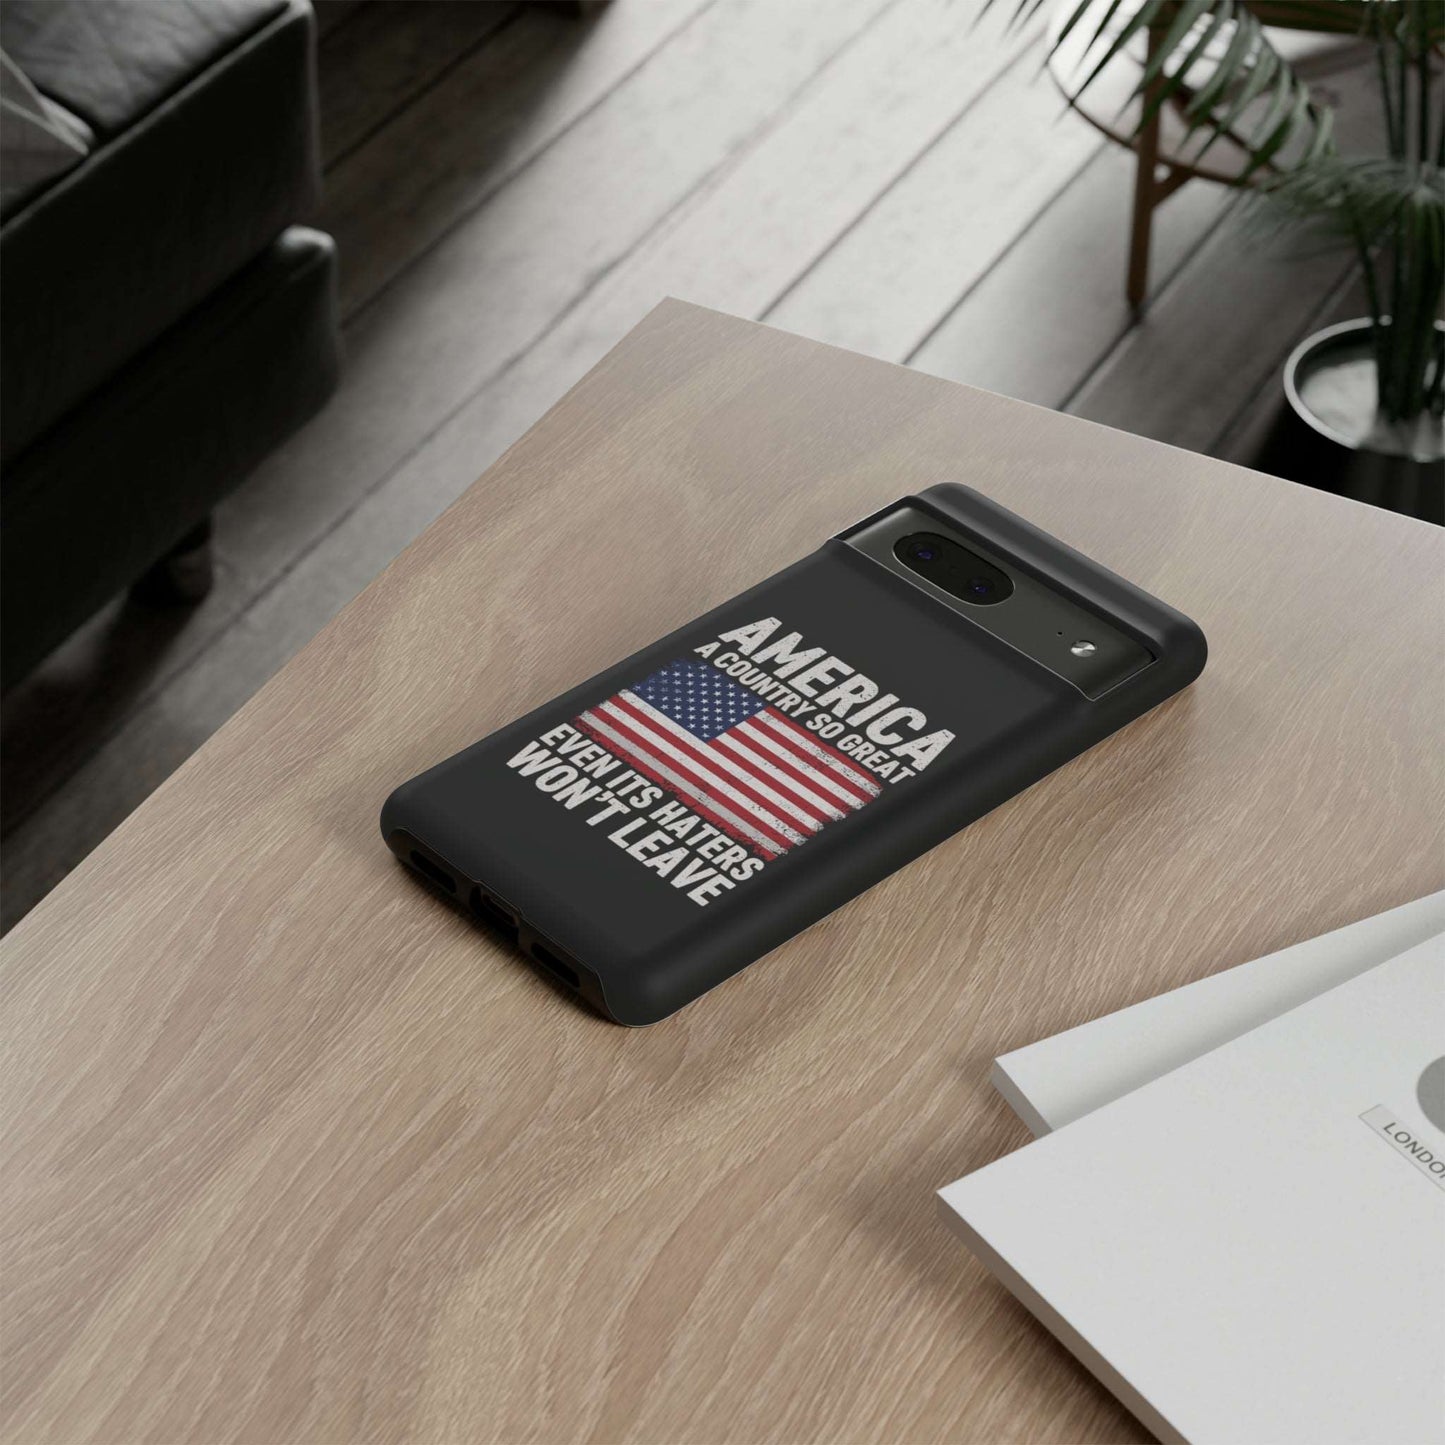 America Country So Great Even The Haters Won't Leave Phone Case iPhone 12-15 Pro Max, Google Pixel 5-7 Pro, Samsung S20-23